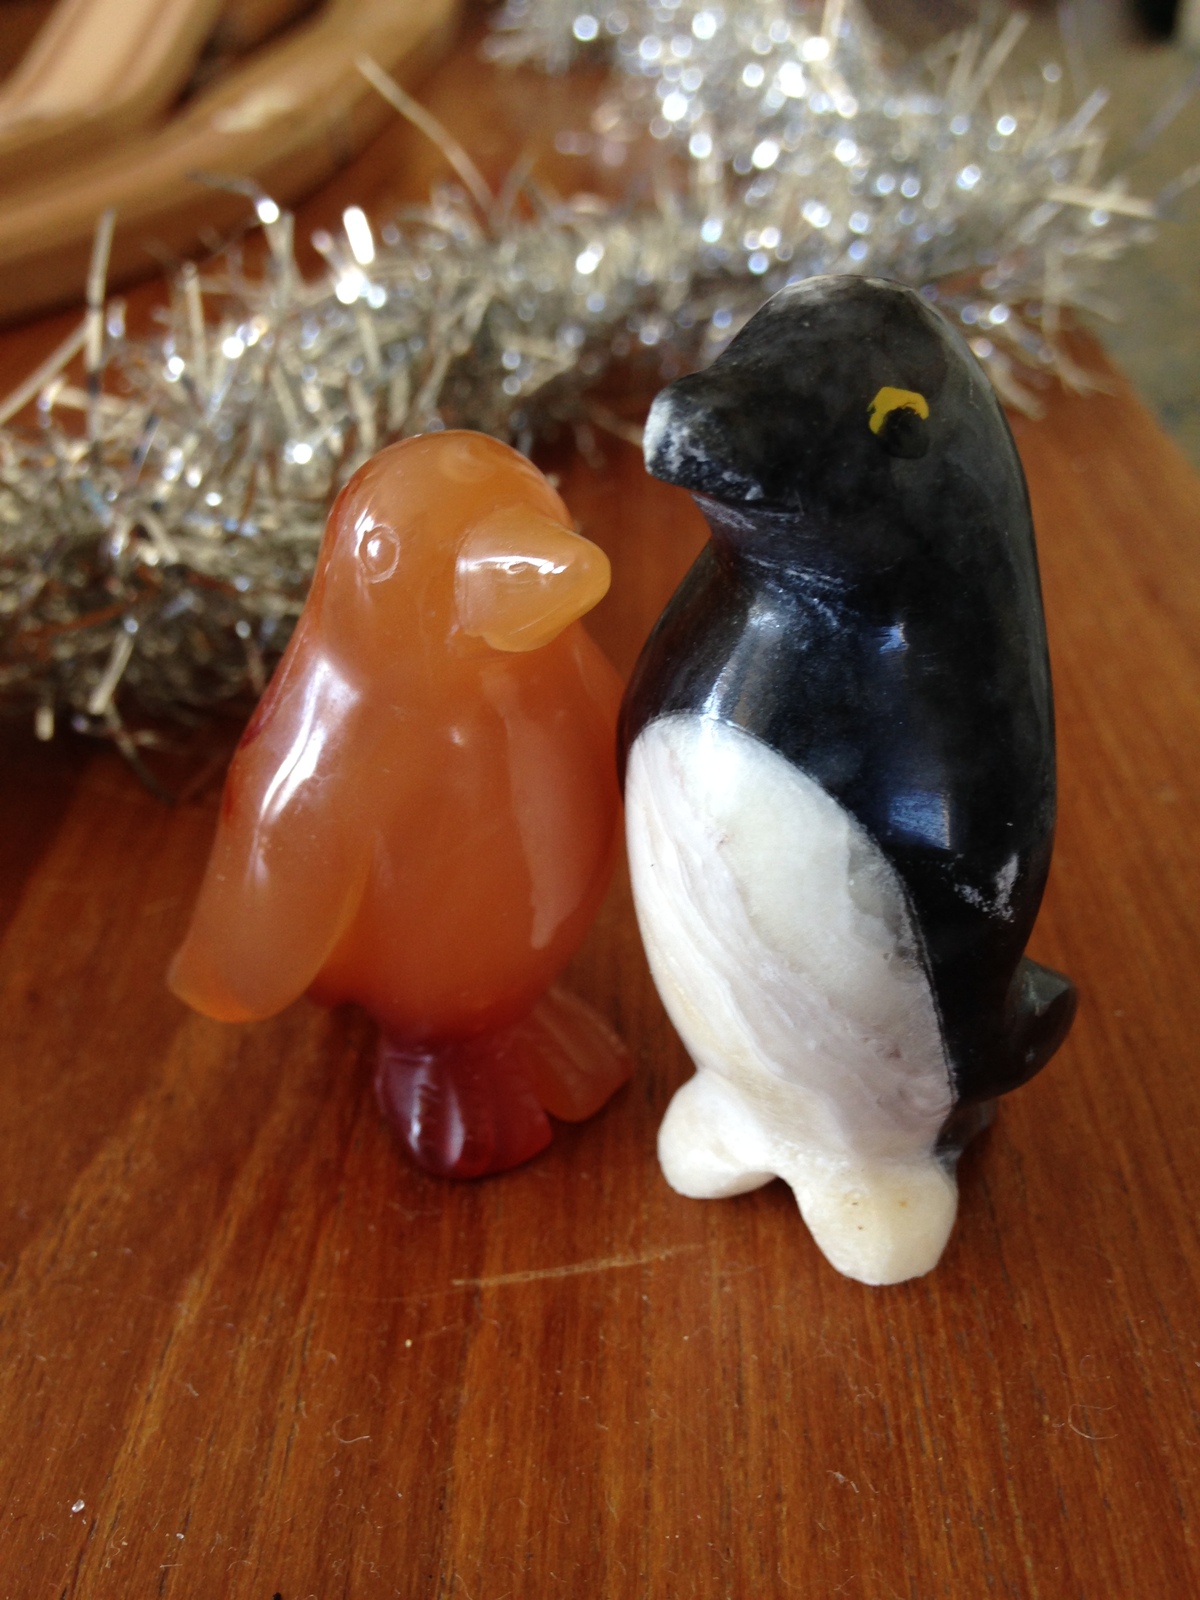 set of 2 marble penguins approx 2-2.5" tall - $48.99